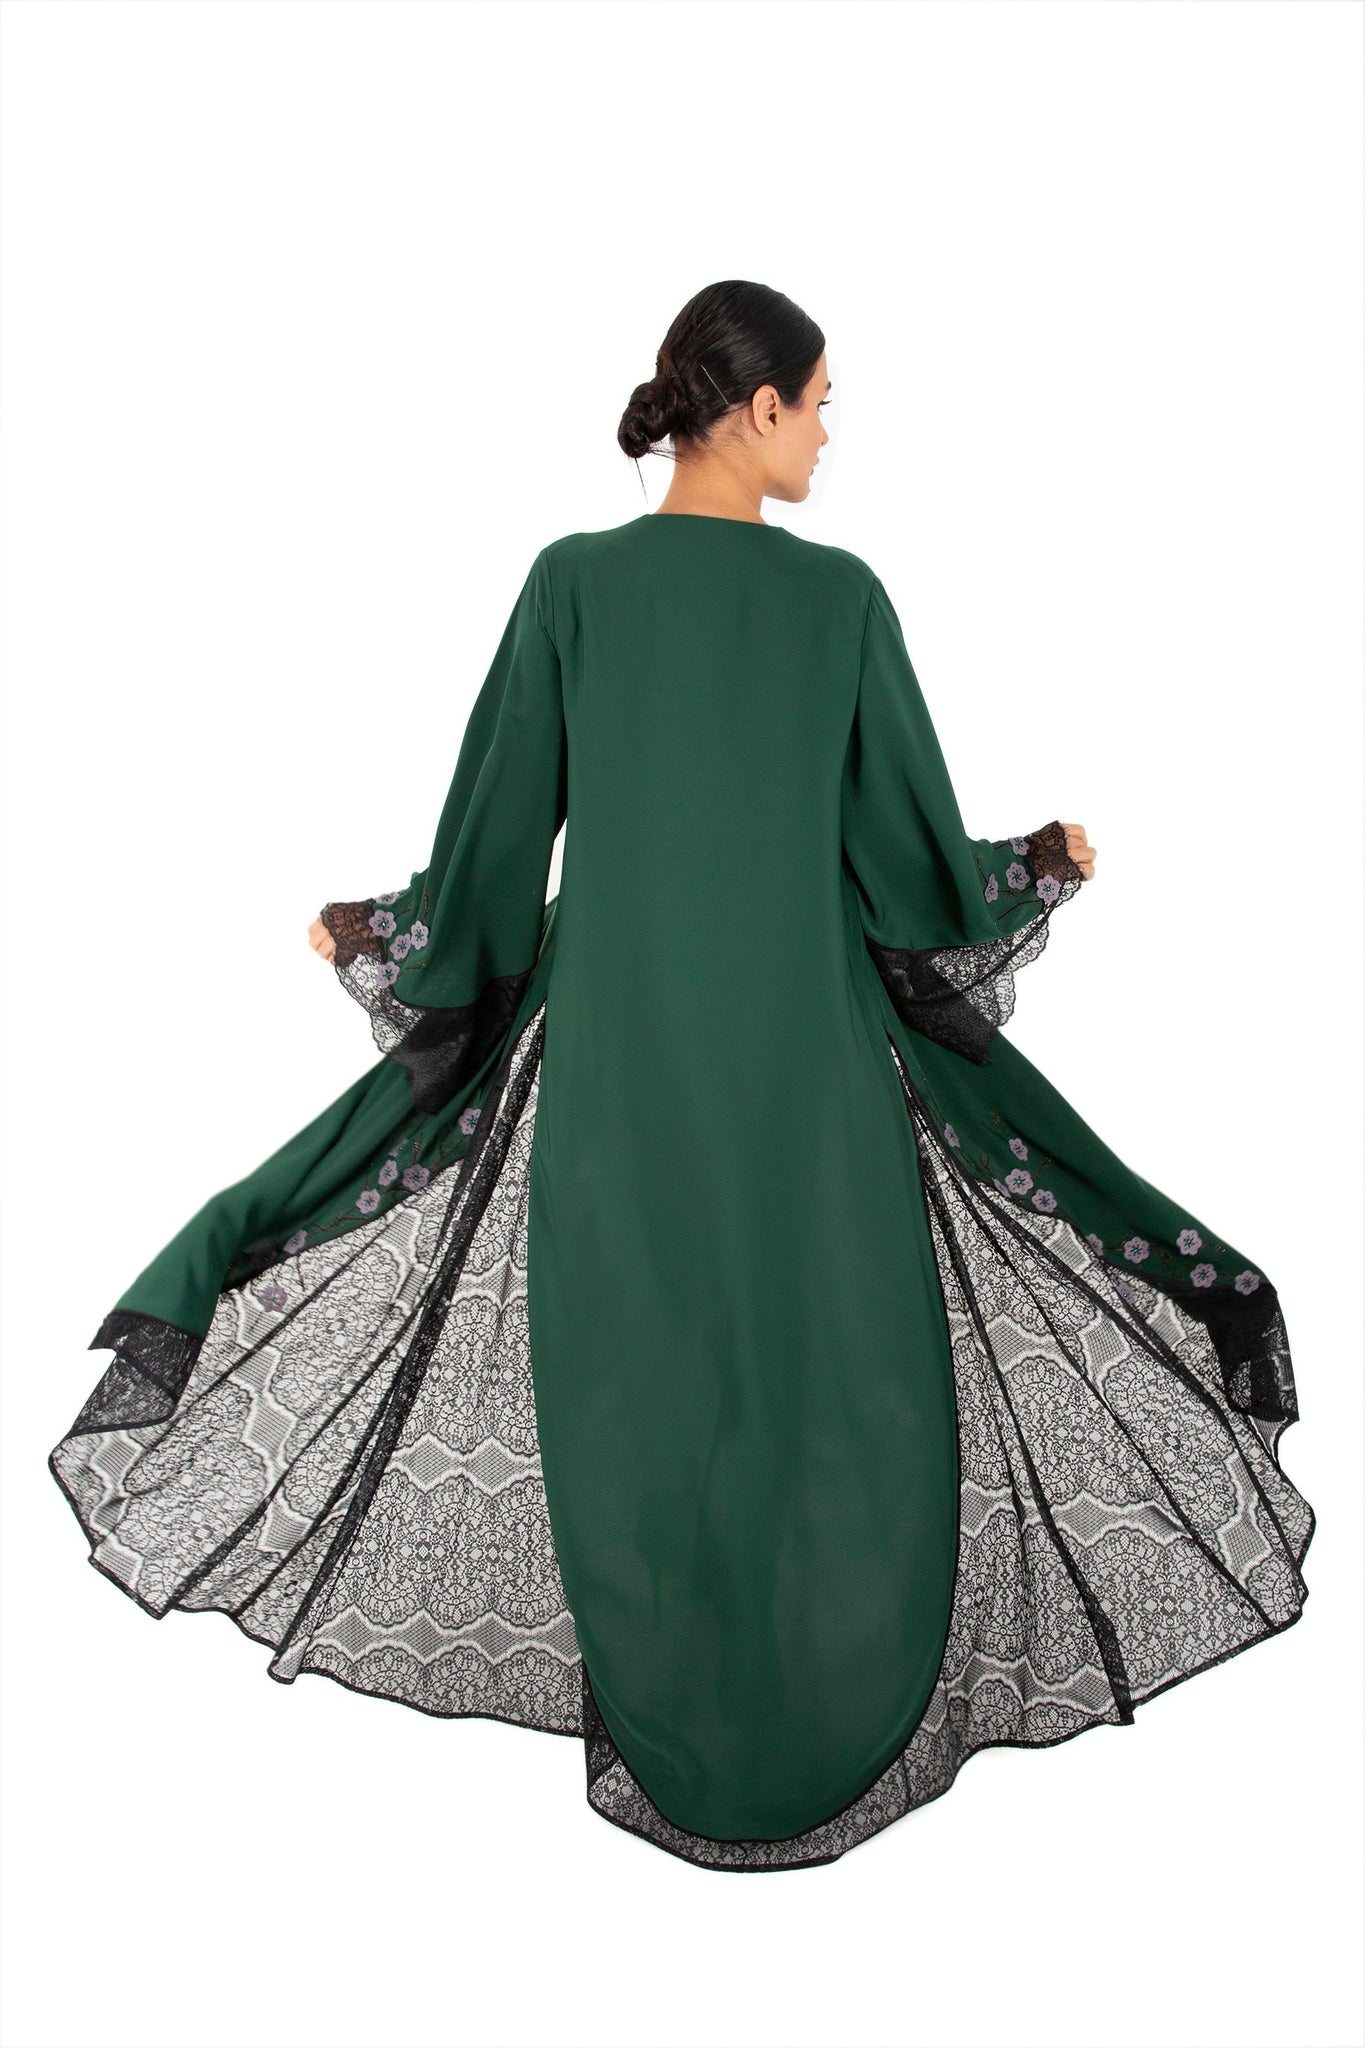 Hanayen Exquisite Abaya with lace inserts detailed with floral laser cut